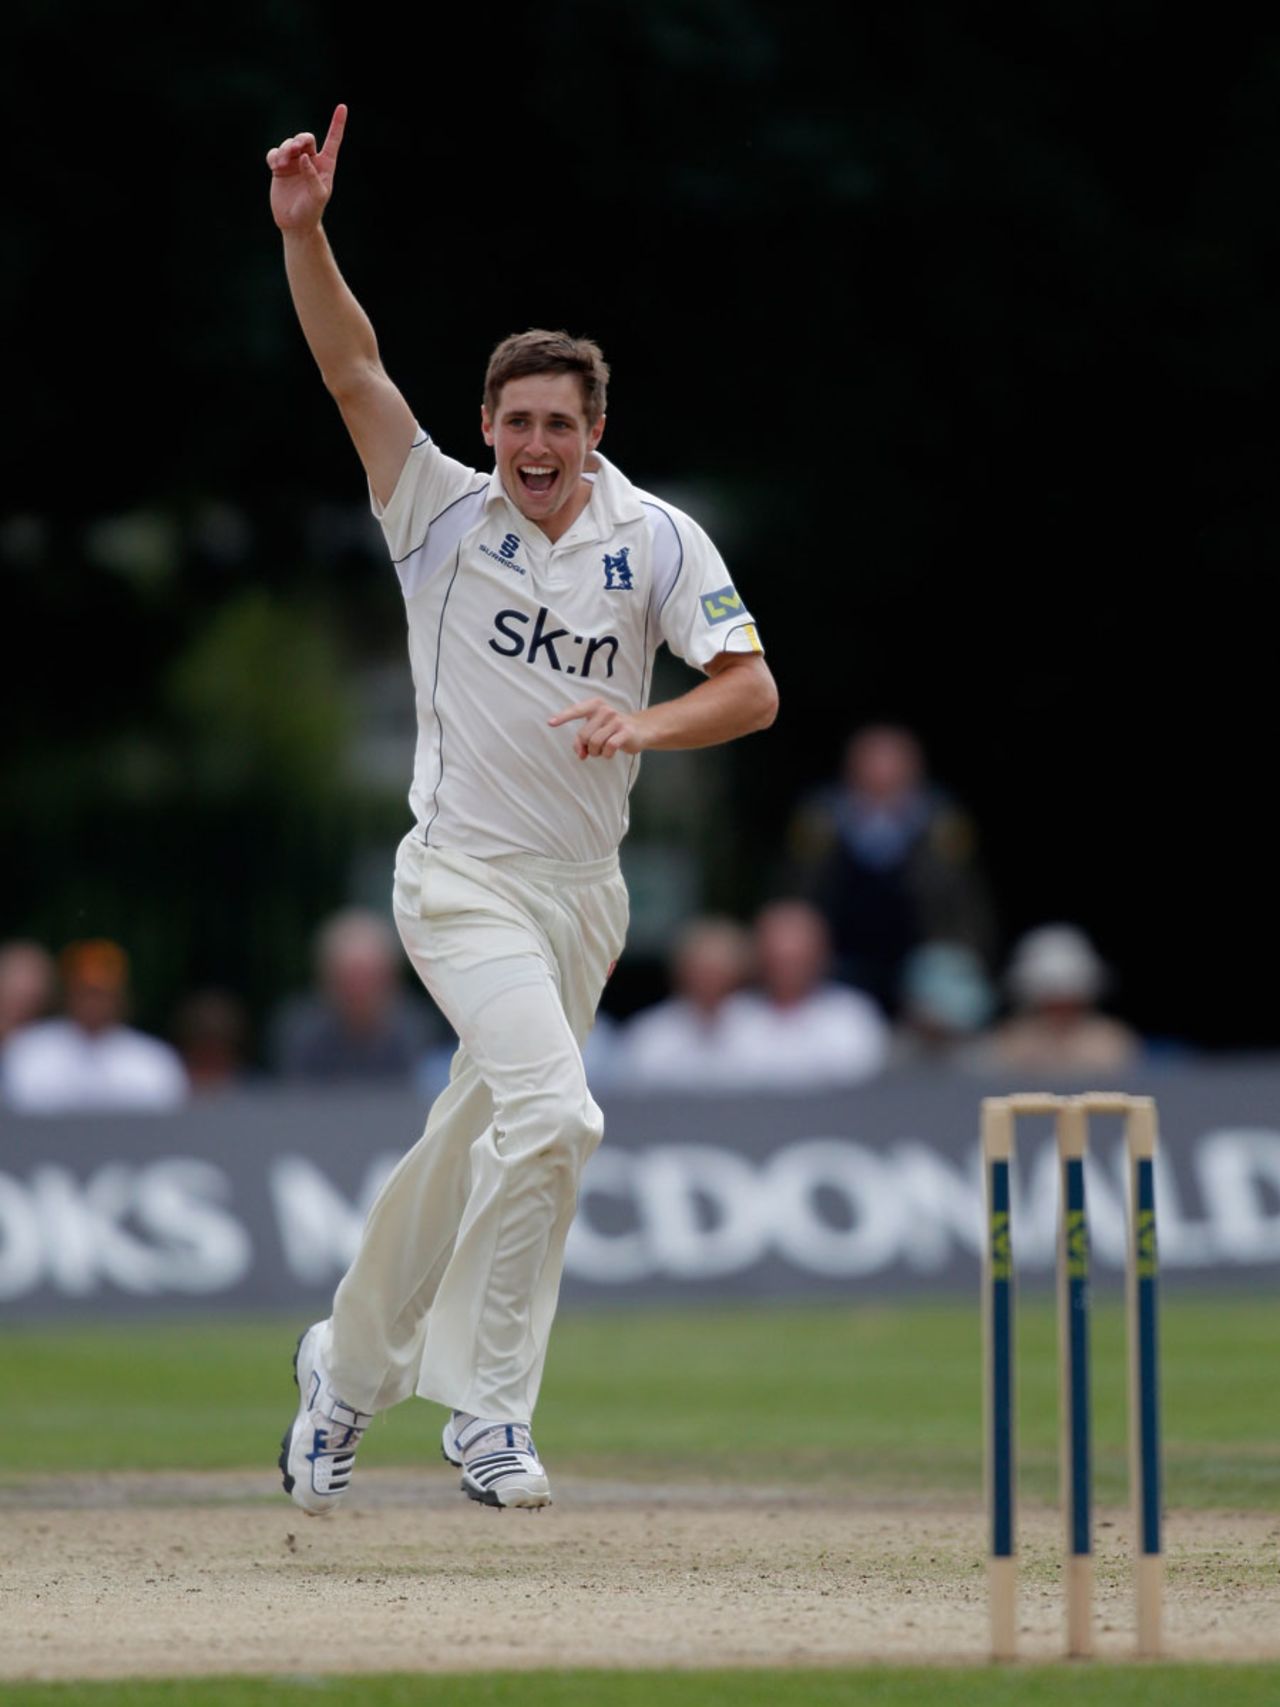 Chris Woakes celebrates taking a wicket, County Championship, Division One, Uxbridge, 1st day, August 1, 2012